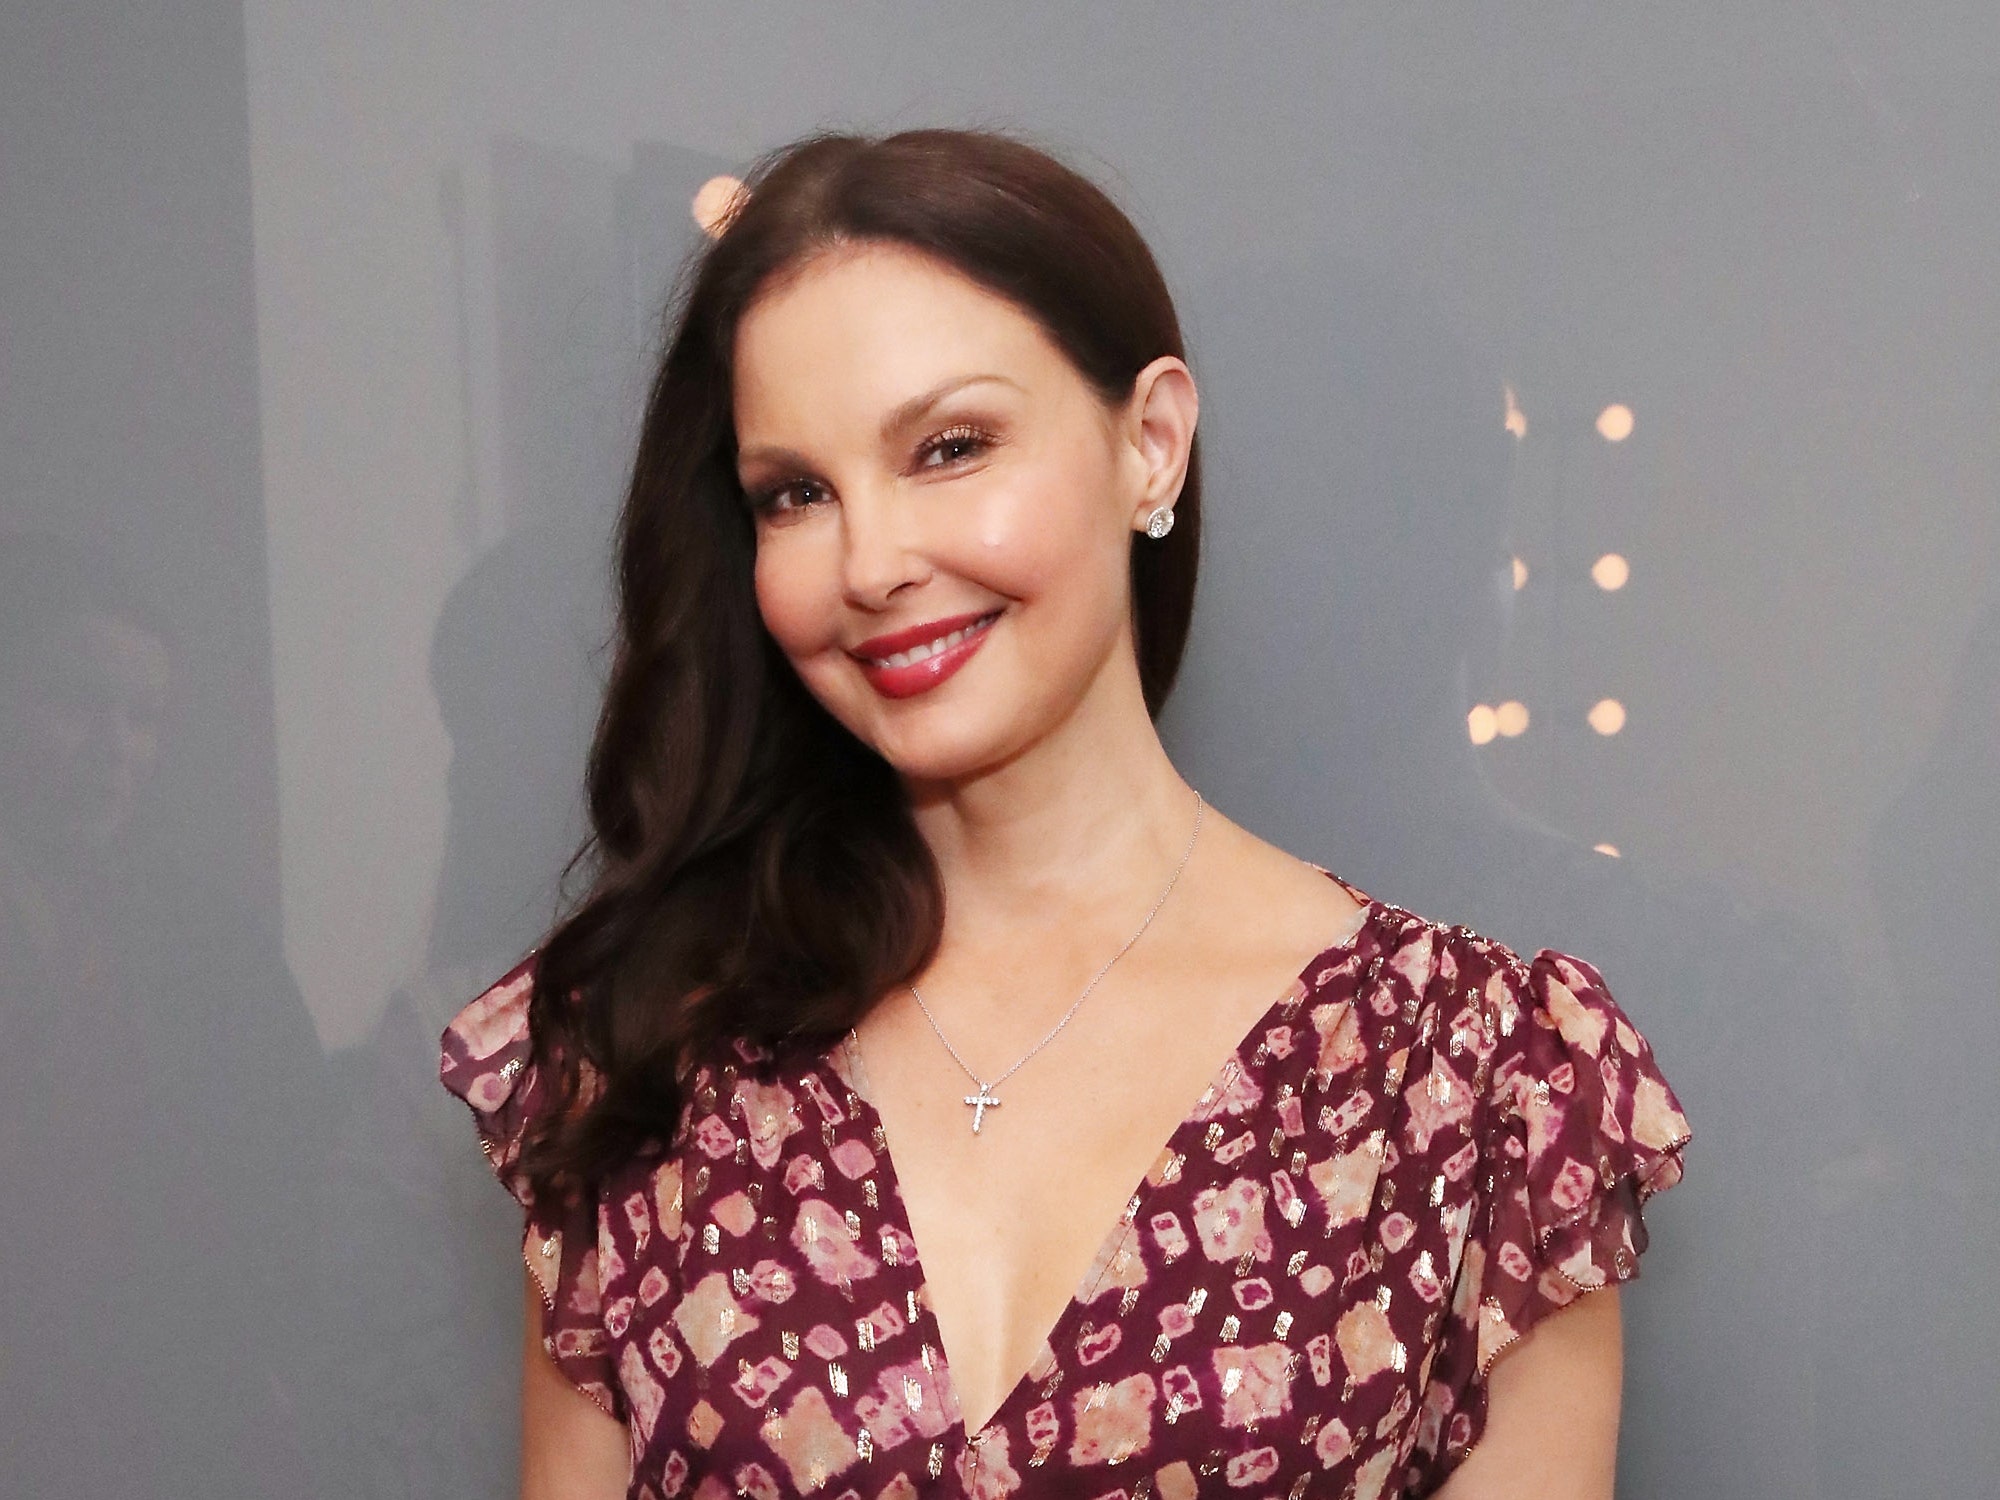 Ashley Judd's Transformation From 22 To 54 - Her Life Behind The Camera